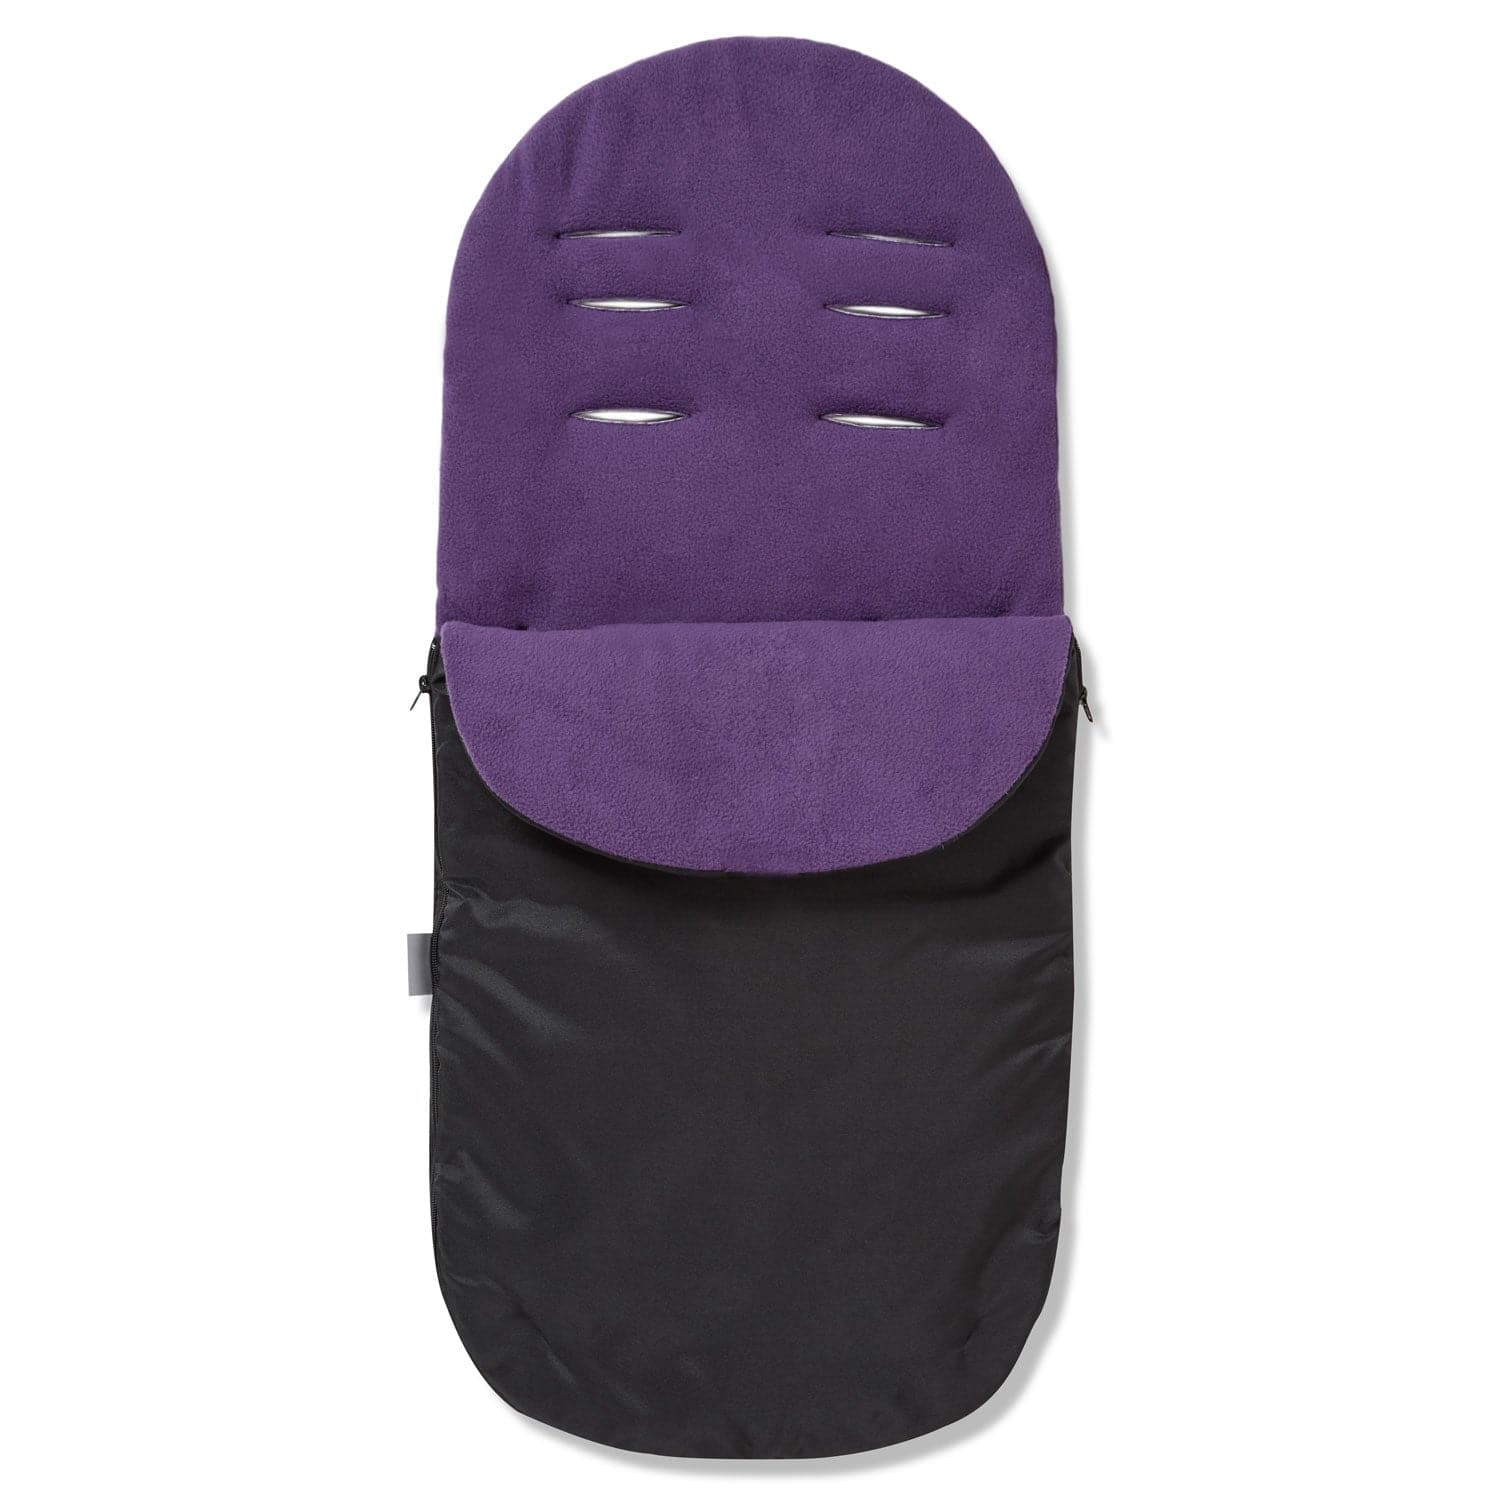 Footmuff / Cosy Toes Compatible with Zooper - Purple / Fits All Models | For Your Little One